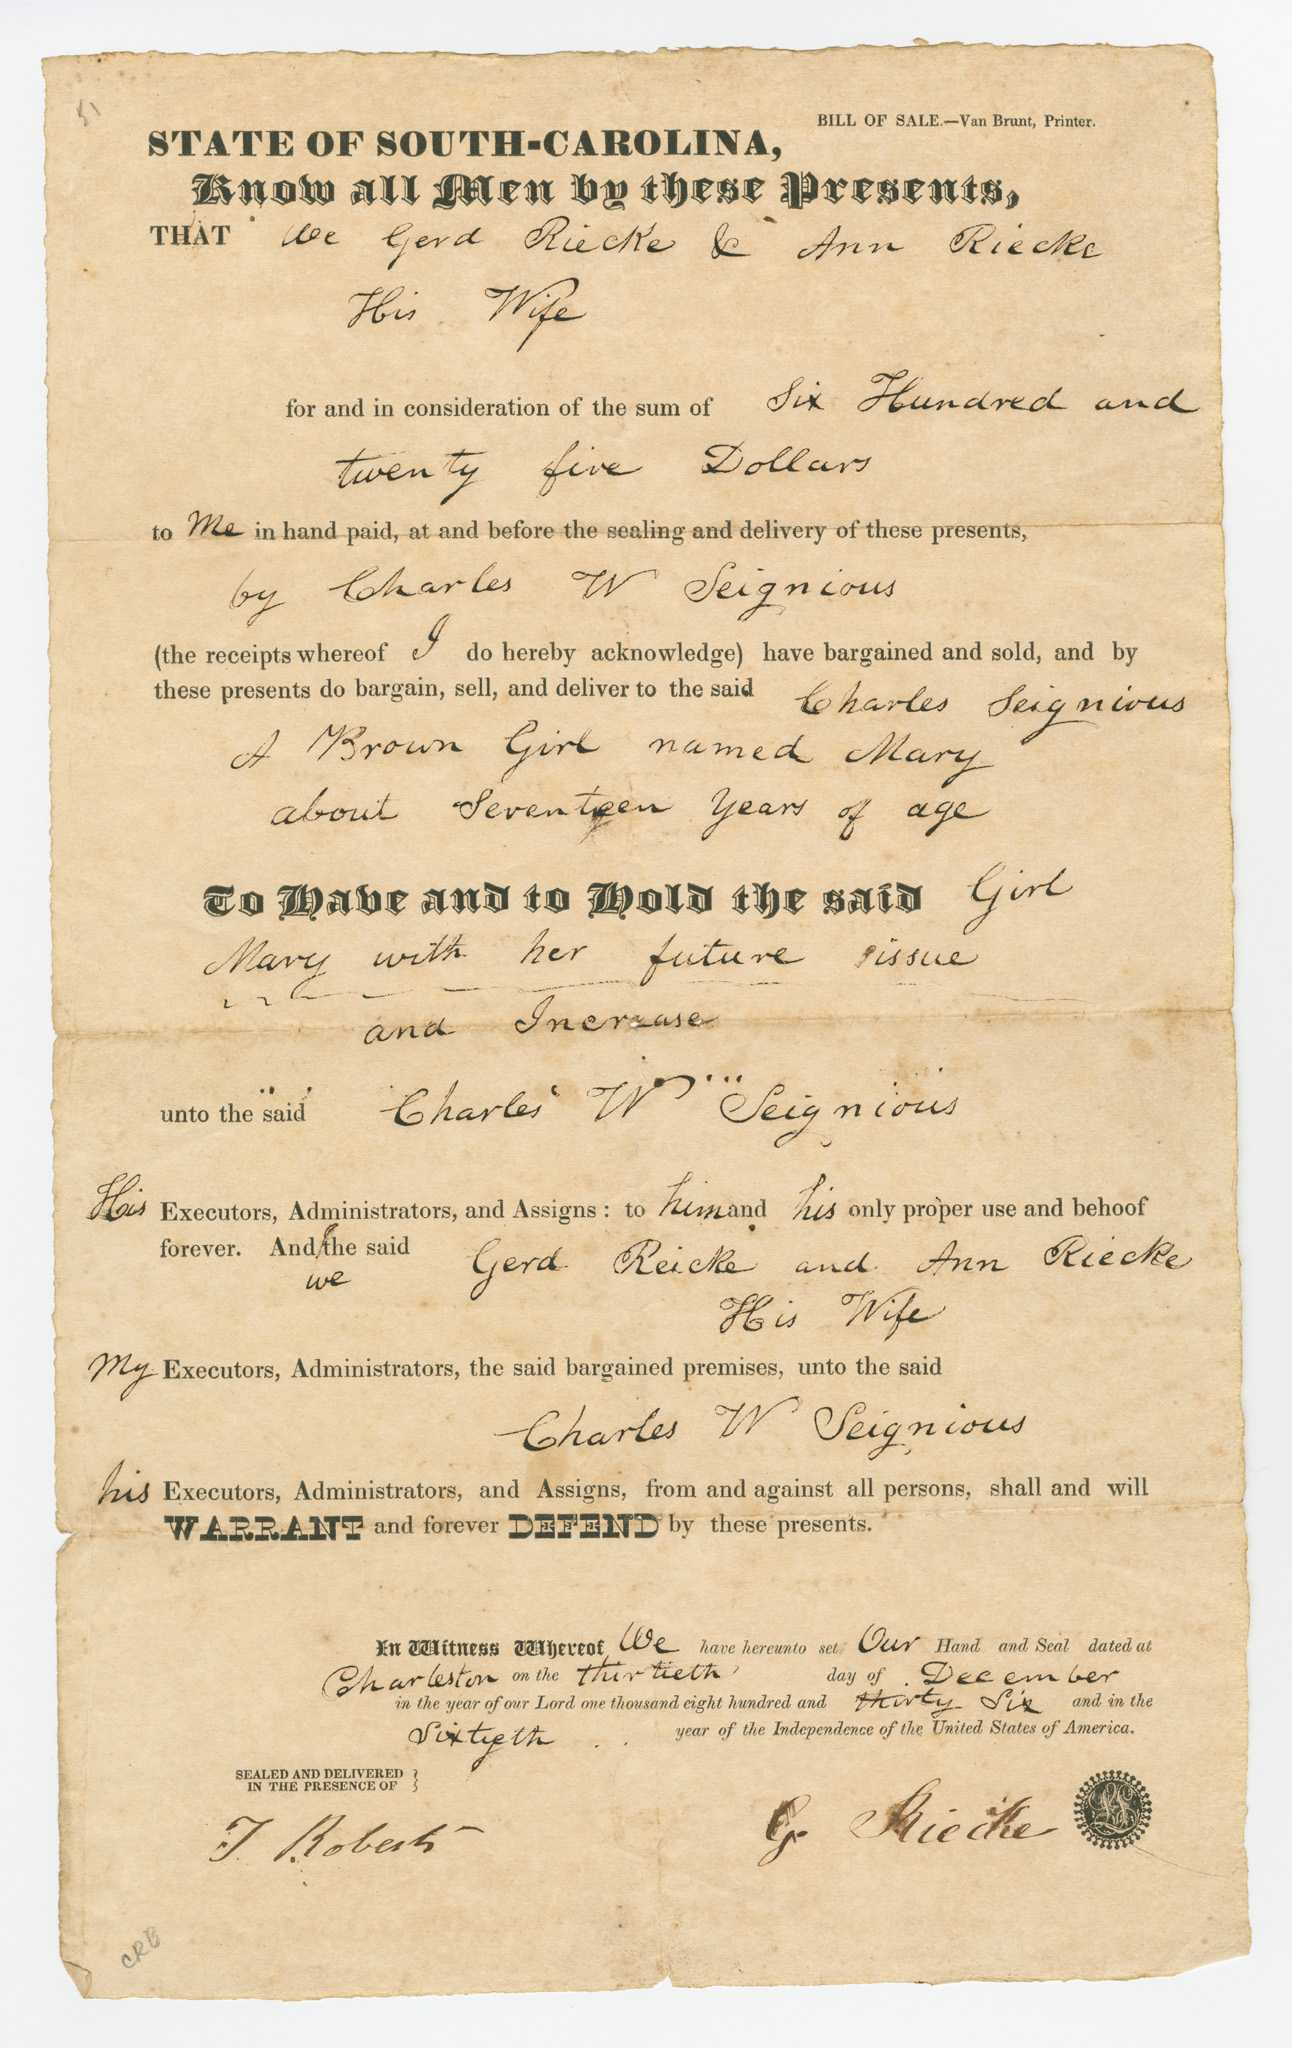 A single page document consisting of a pre-printed form for a bill of sale in the state of South Carolina with handwritten details in black ink for seventeen (17) year old Mary from Gerd and Ann Riecke to Charles Seignious for the sum of $625.00 on December 30, 1836, in Charleston.

The document reads in part: [We Gerd Riecke & Ann Riecke / His Wife / for and in consideration of the sum of Six Hundred and / twenty five Dollars / to Me in hand paid, at and before the sealing and delivery of these presents, / by Charles W Seignious / (the receipts whereof I do hereby acknowledge) have bargained and sold, and by / these presents do bargain, sell, and deliver to the said Charles Seignious / A Brown Girl named Mary / about Seventeen years of age / To Have and to Hold the said Girl / Mary with her future issue / and Increase / unto the said Charles W Seignious]. 

The document is signed at the bottom right [G. Riecke] with seal in black ink and witnessed by [T Roberts] in the bottom left corner. There is no printing or inscriptions on the verso.